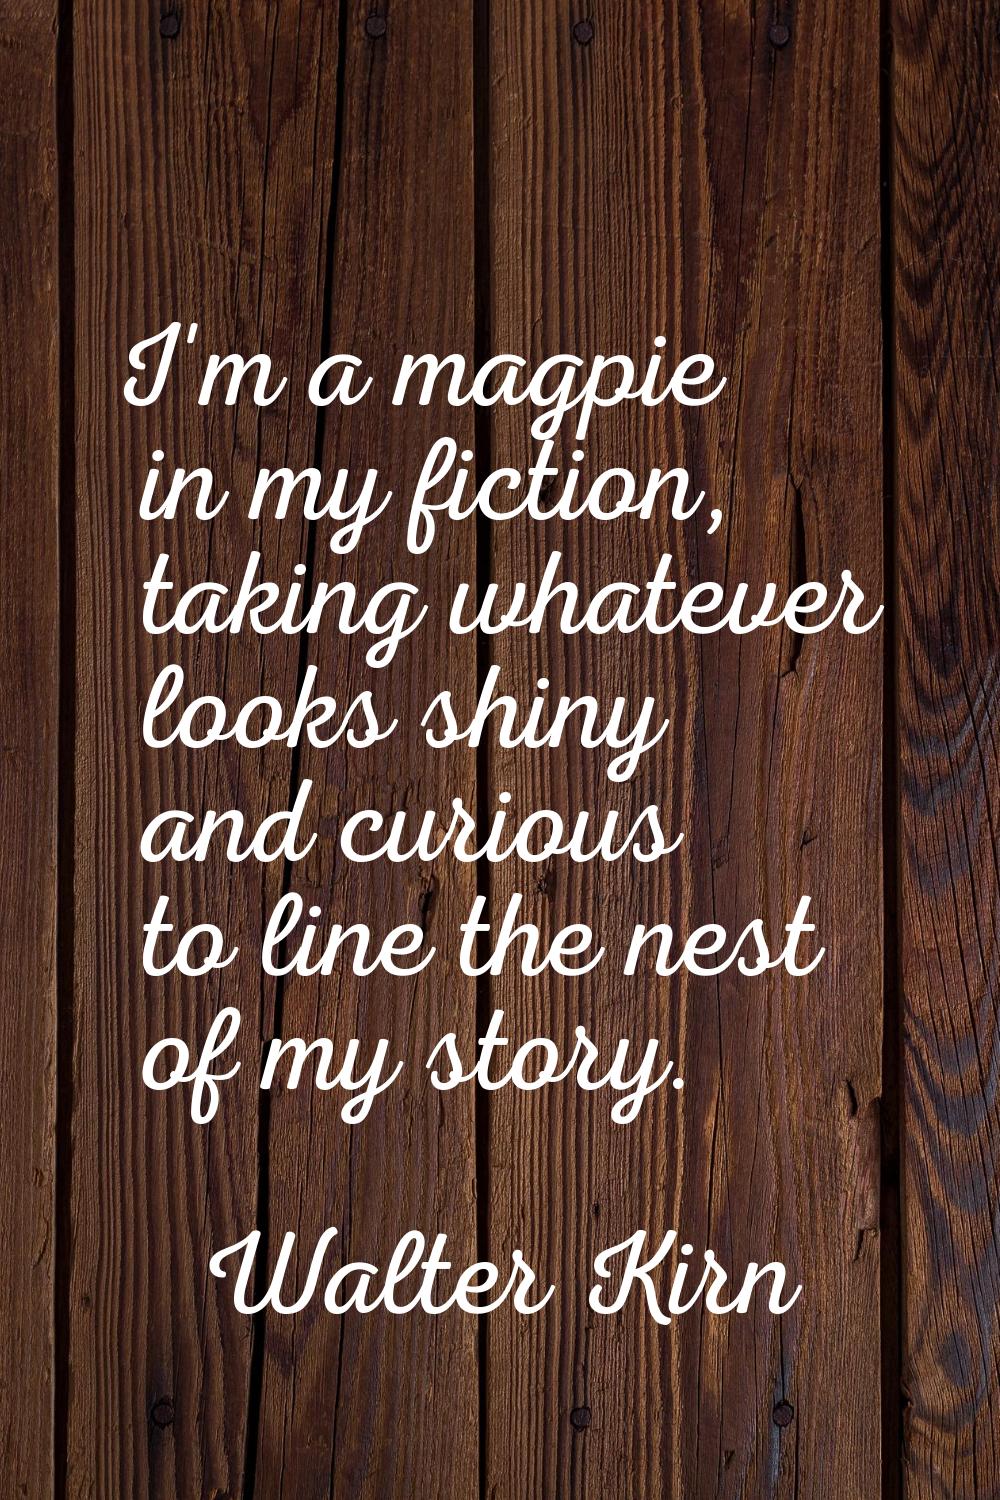 I'm a magpie in my fiction, taking whatever looks shiny and curious to line the nest of my story.